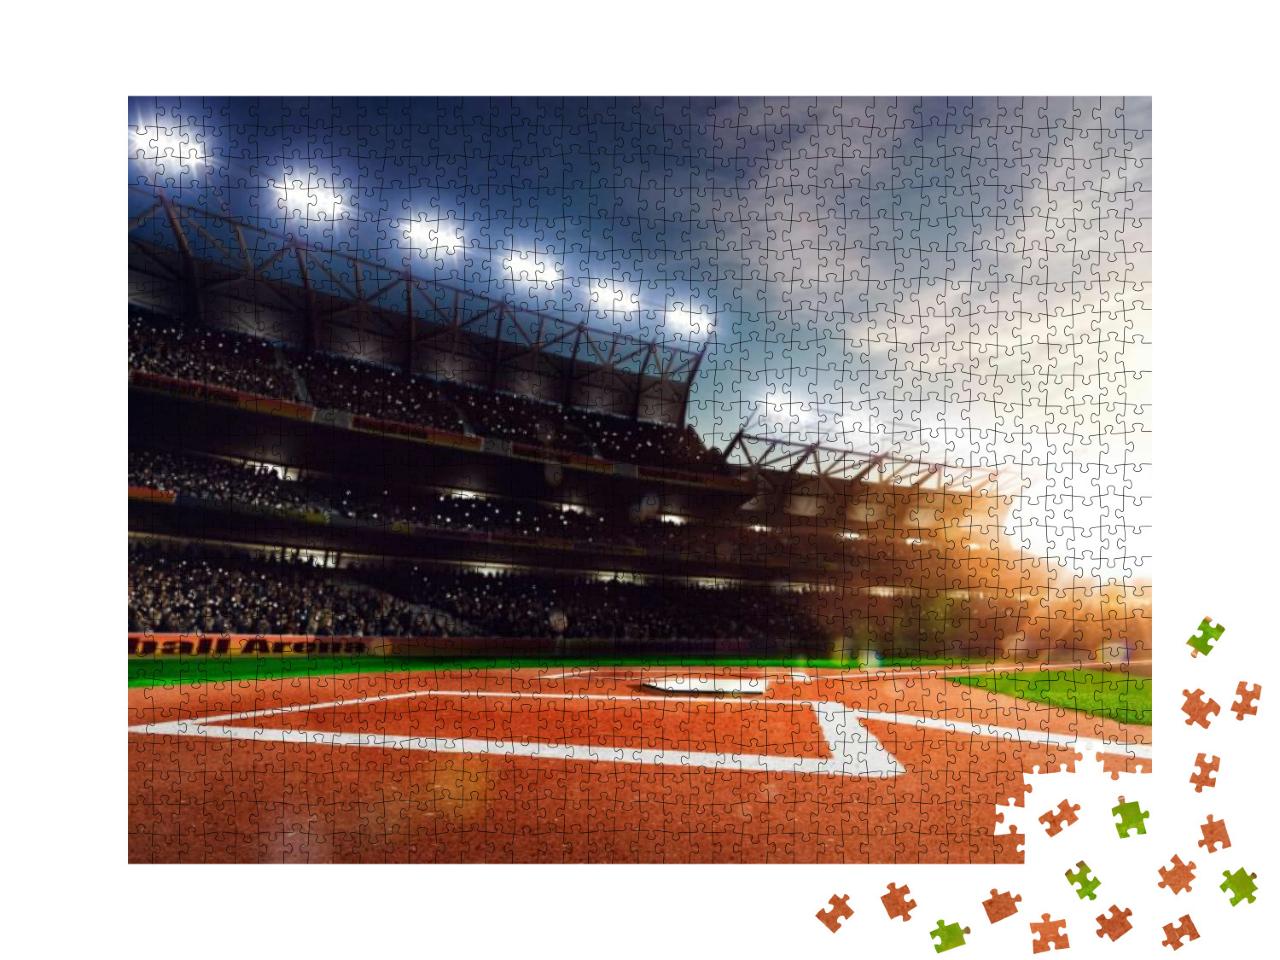 Professional Baseball Grand Arena in the Sunlight... Jigsaw Puzzle with 1000 pieces